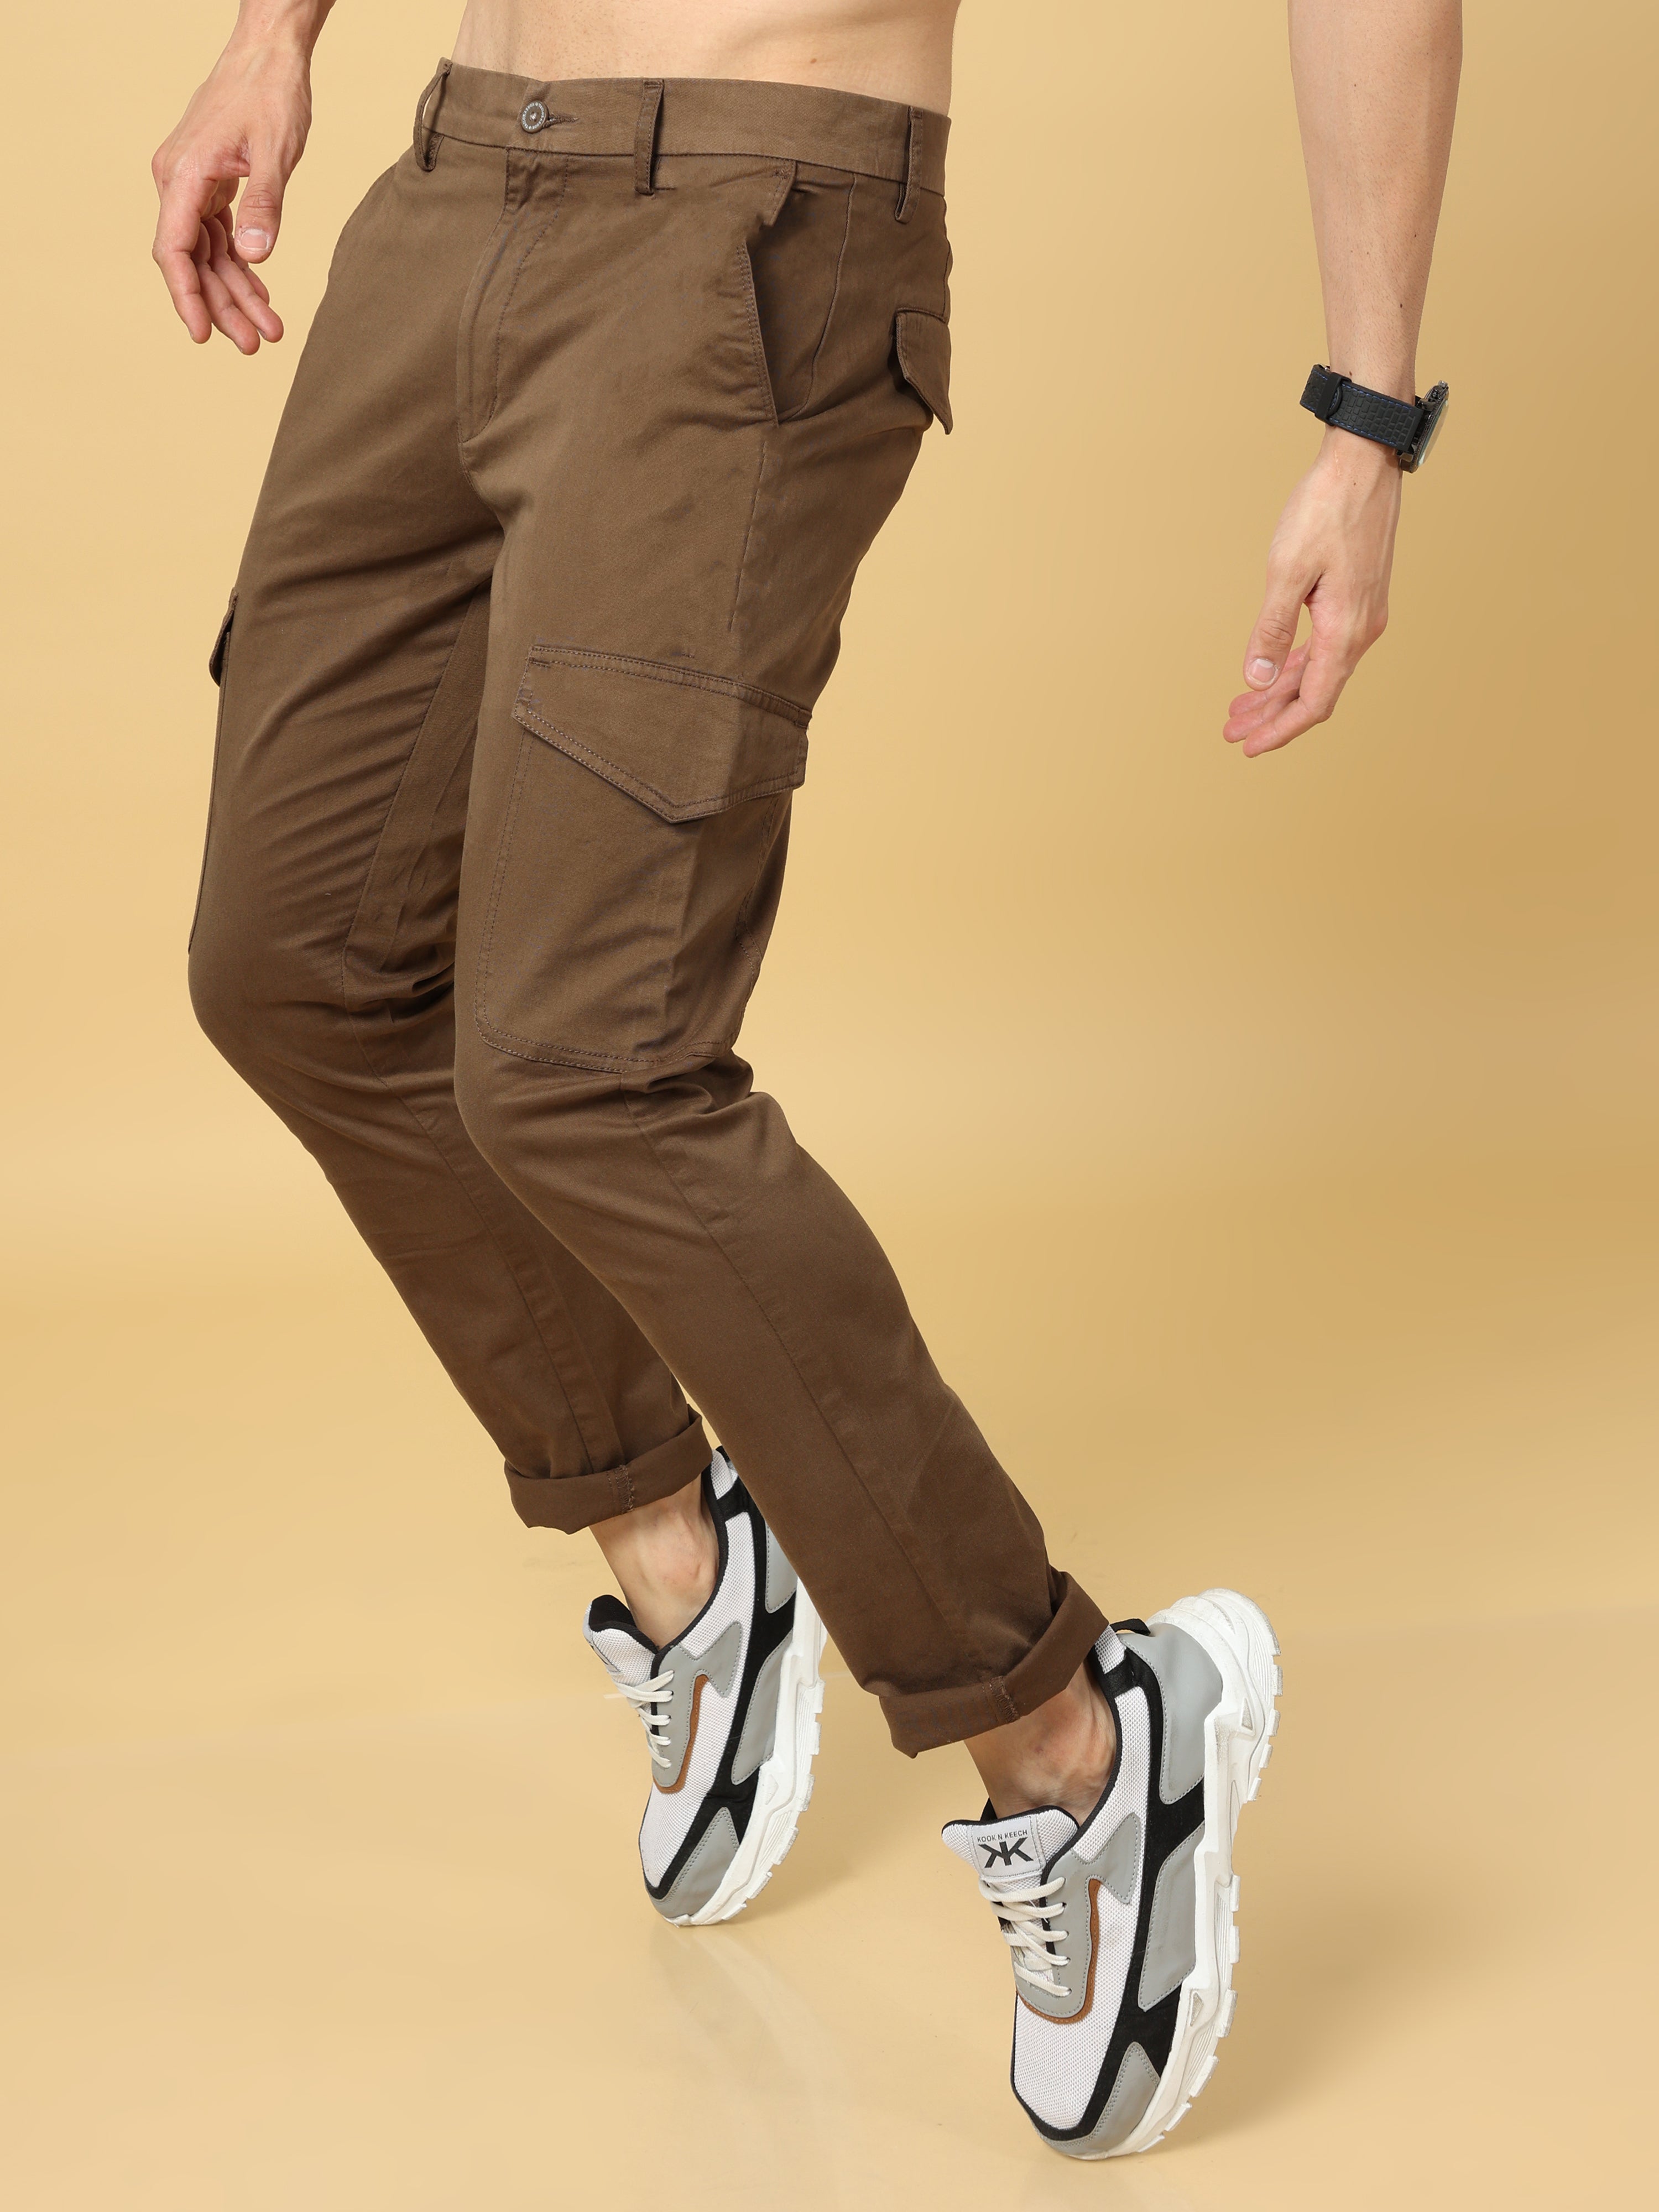 Unbrand Slim Fit Cargo Pants, Men's Fashion, Bottoms, Trousers on Carousell